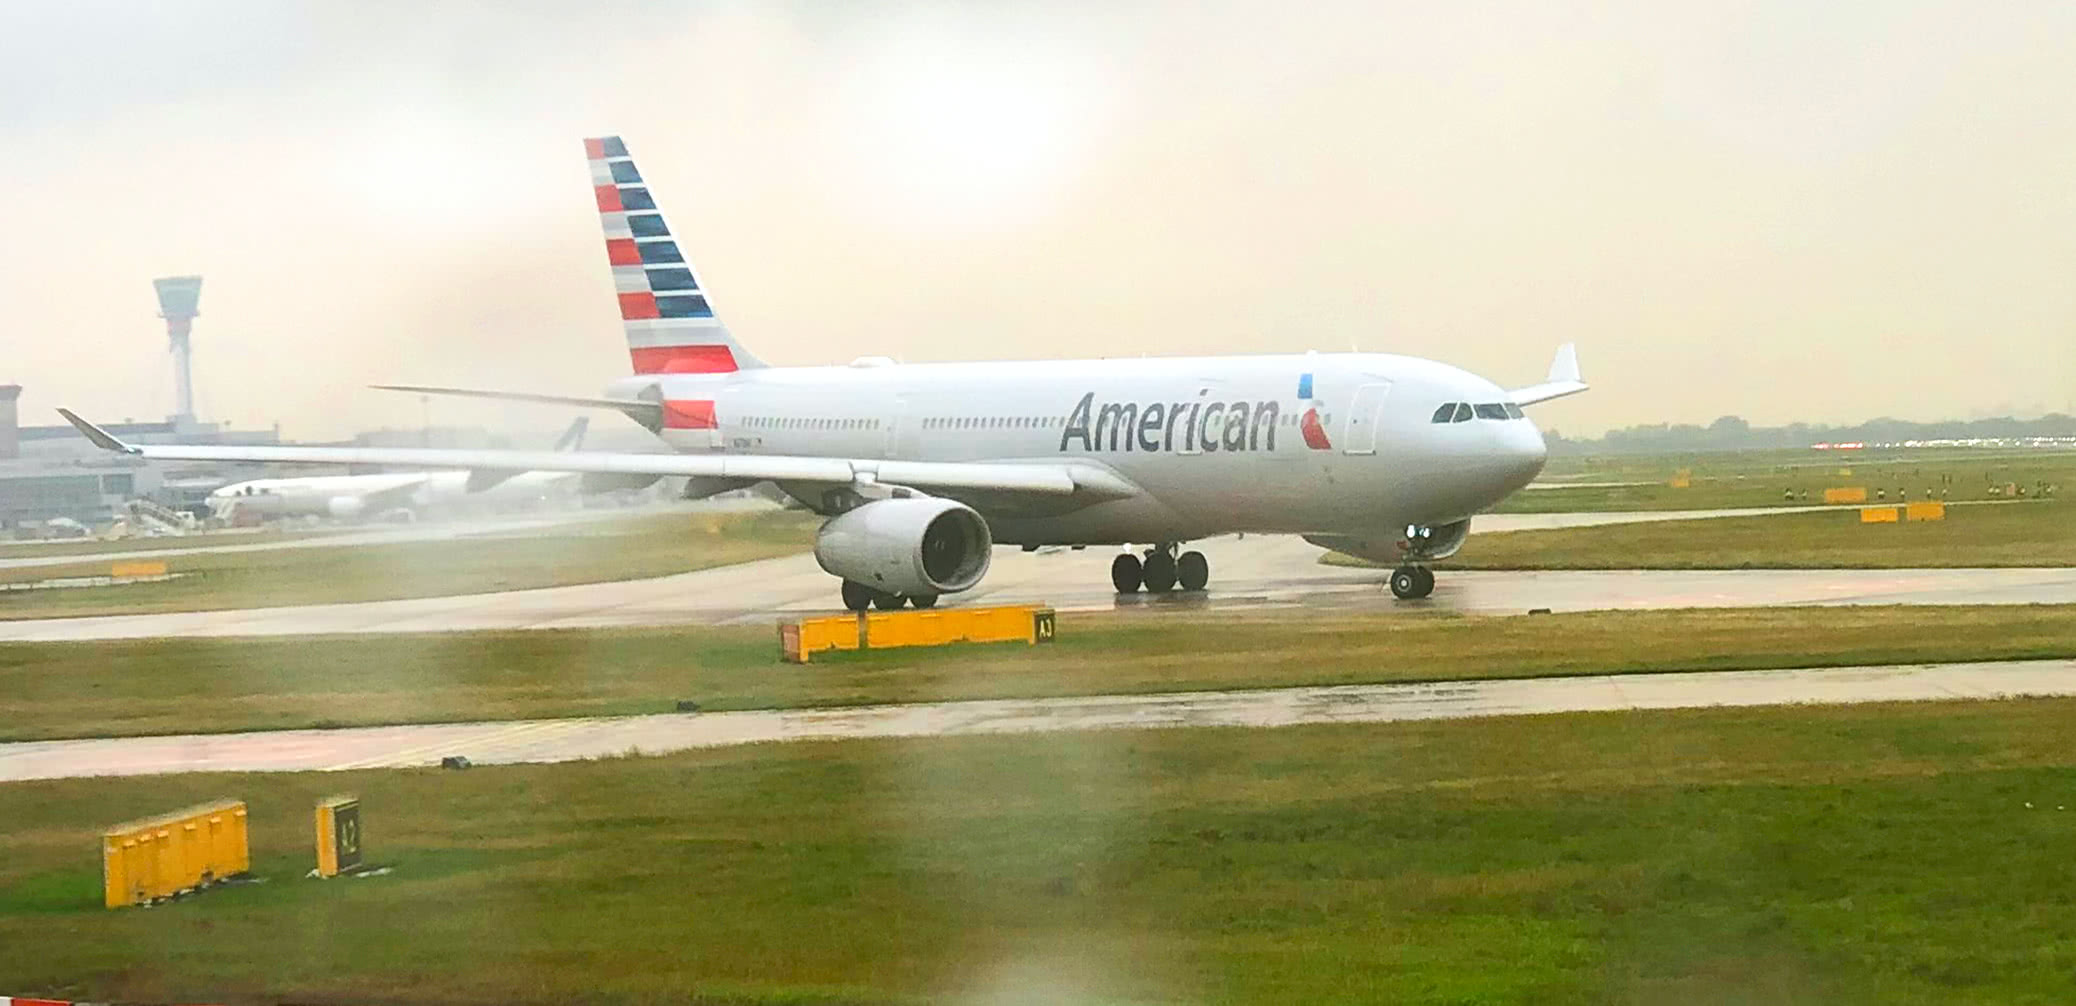 Should You Refuse To Fly American Airlines?